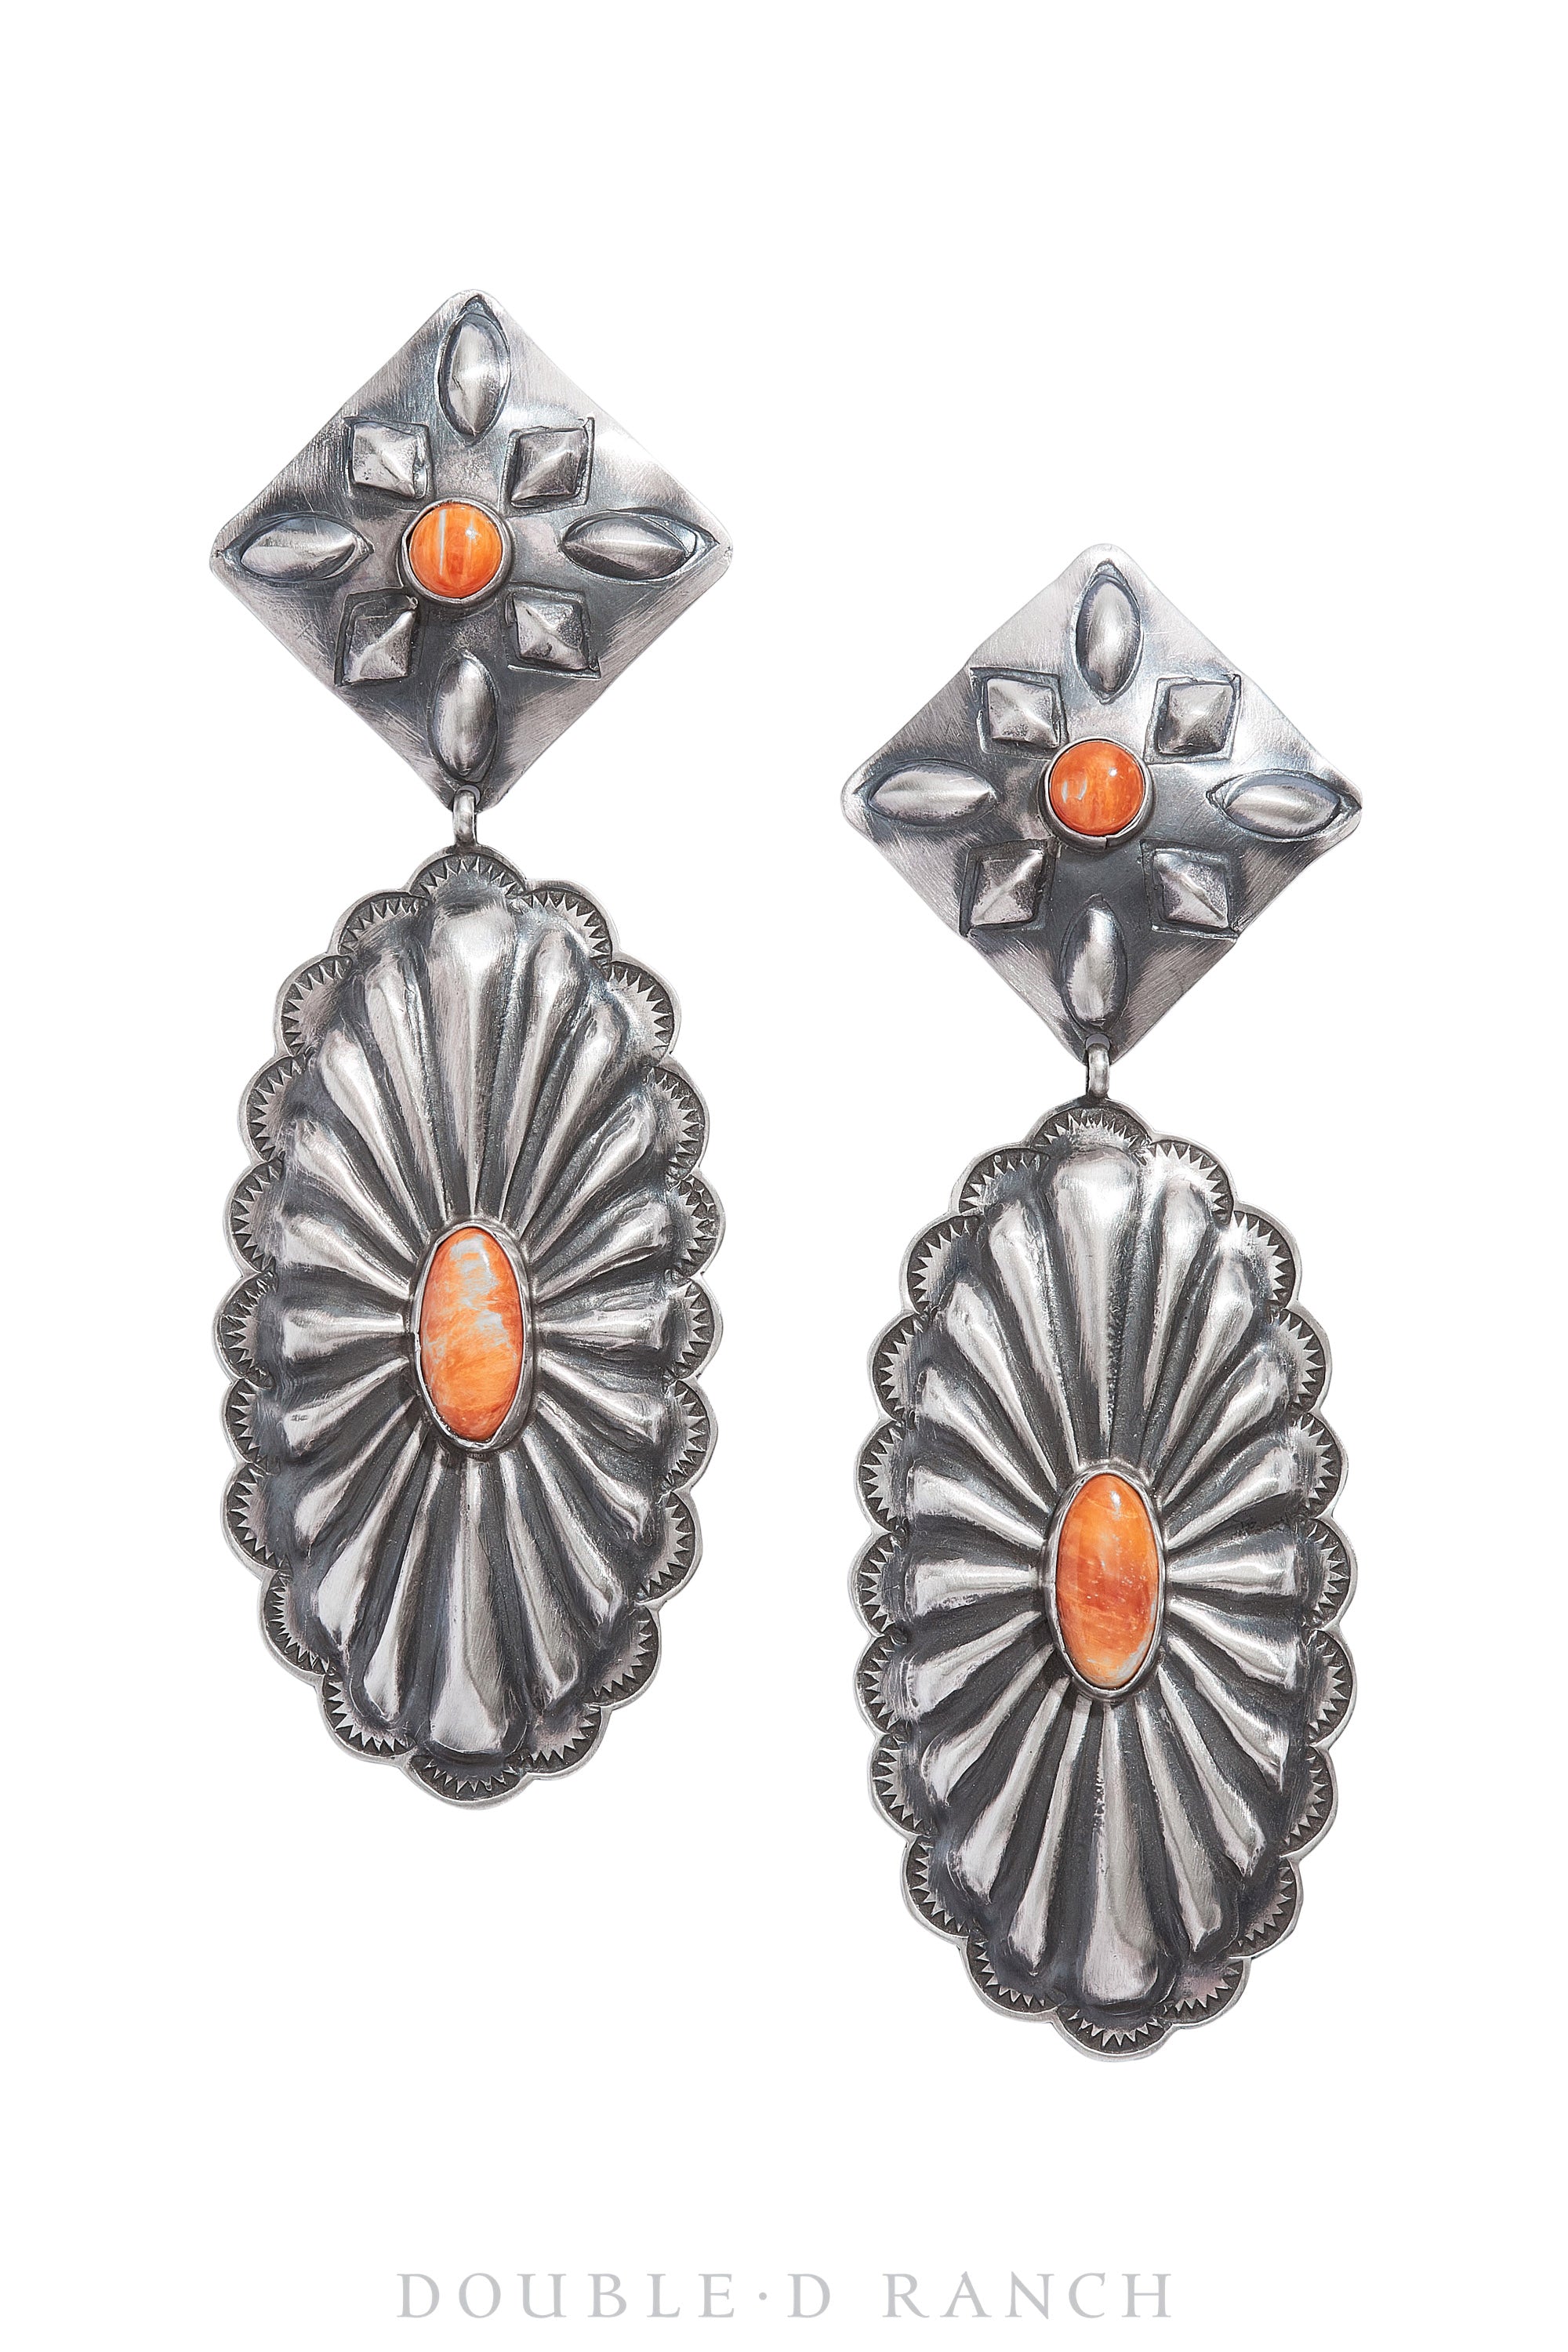 Earrings, Concho, Orange Spiny Oyster & Sterling Silver, Artisan, Hallmark, Contemporary, 1068